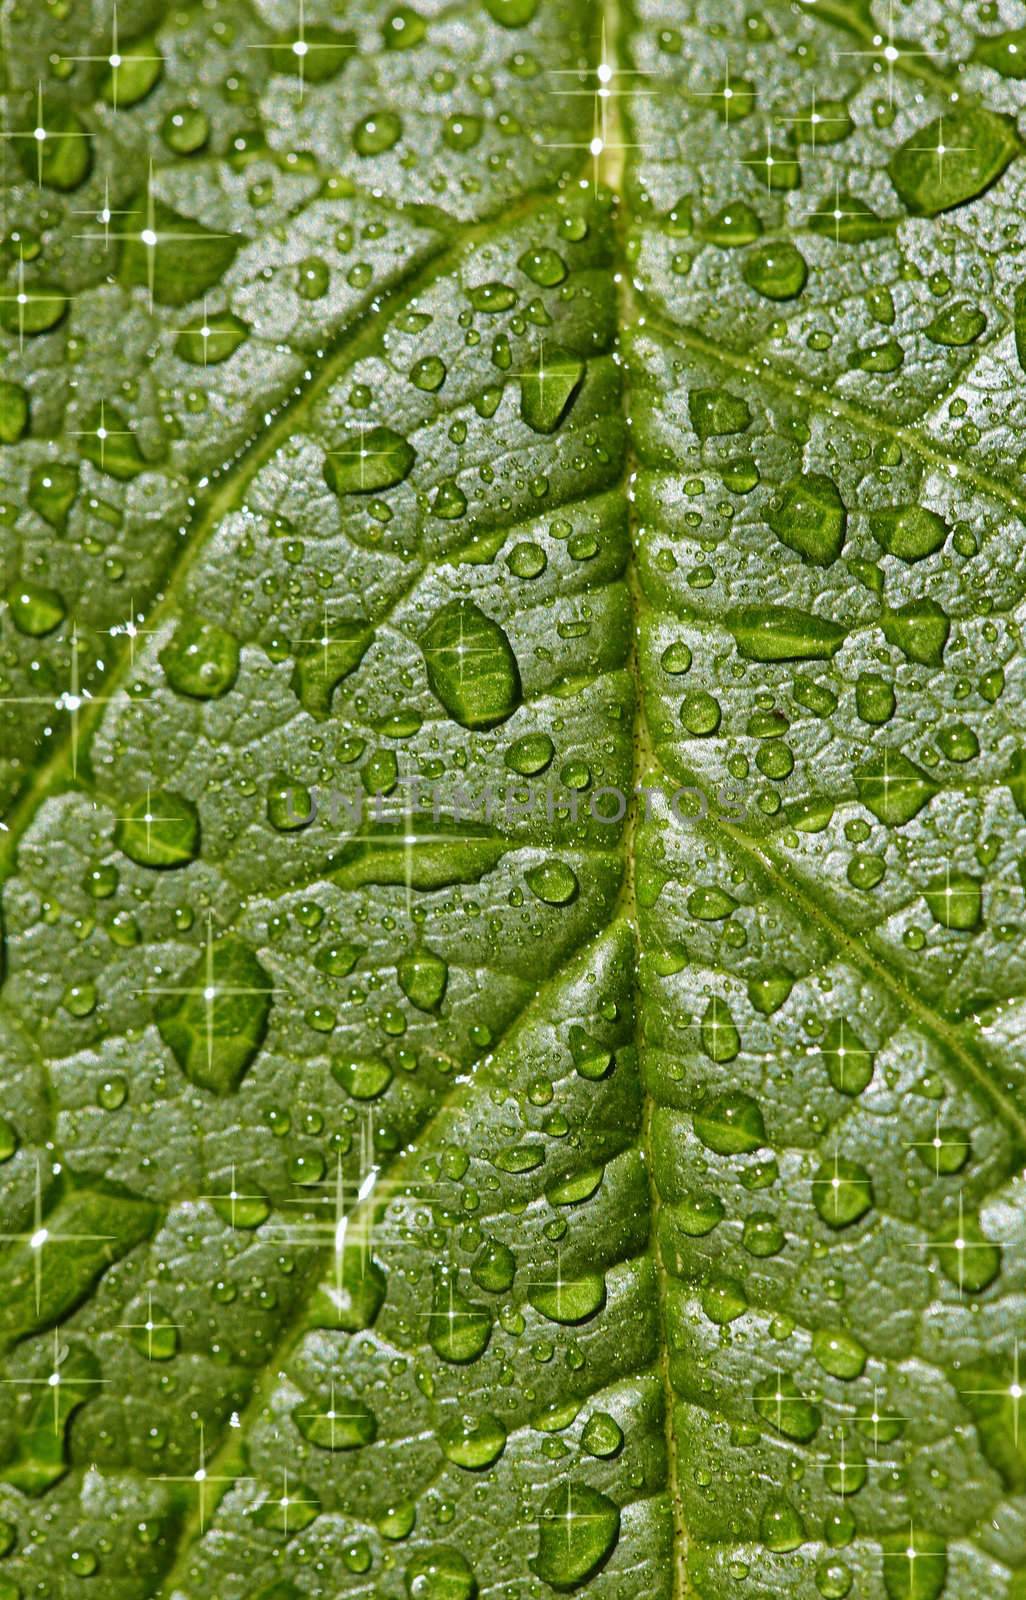 Natural background - the sparkling raindrops on the leaf surface